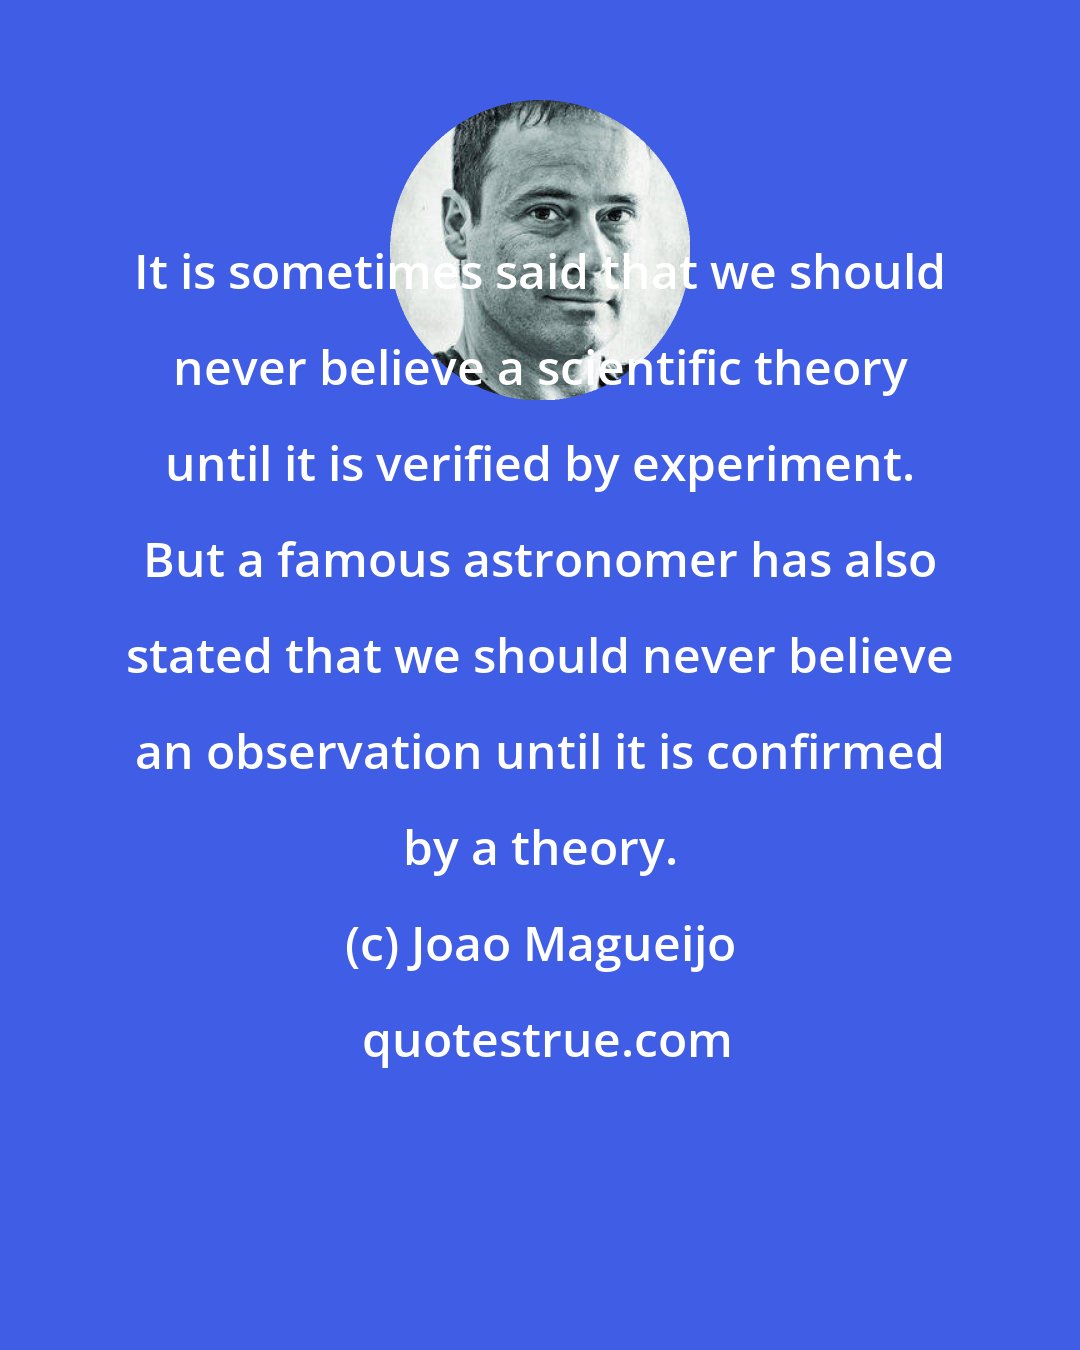 Joao Magueijo: It is sometimes said that we should never believe a scientific theory until it is verified by experiment. But a famous astronomer has also stated that we should never believe an observation until it is confirmed by a theory.